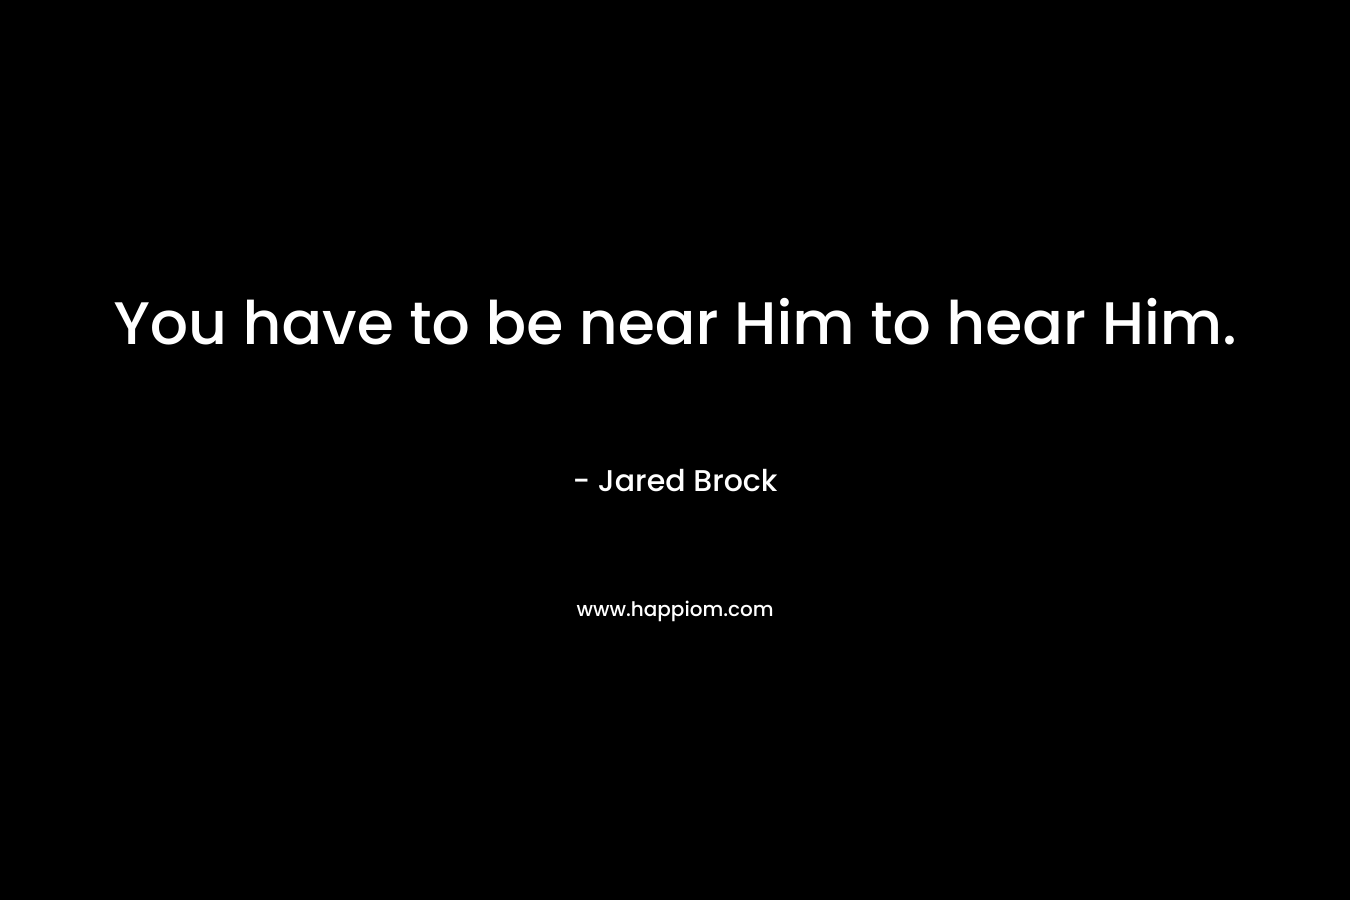 You have to be near Him to hear Him.